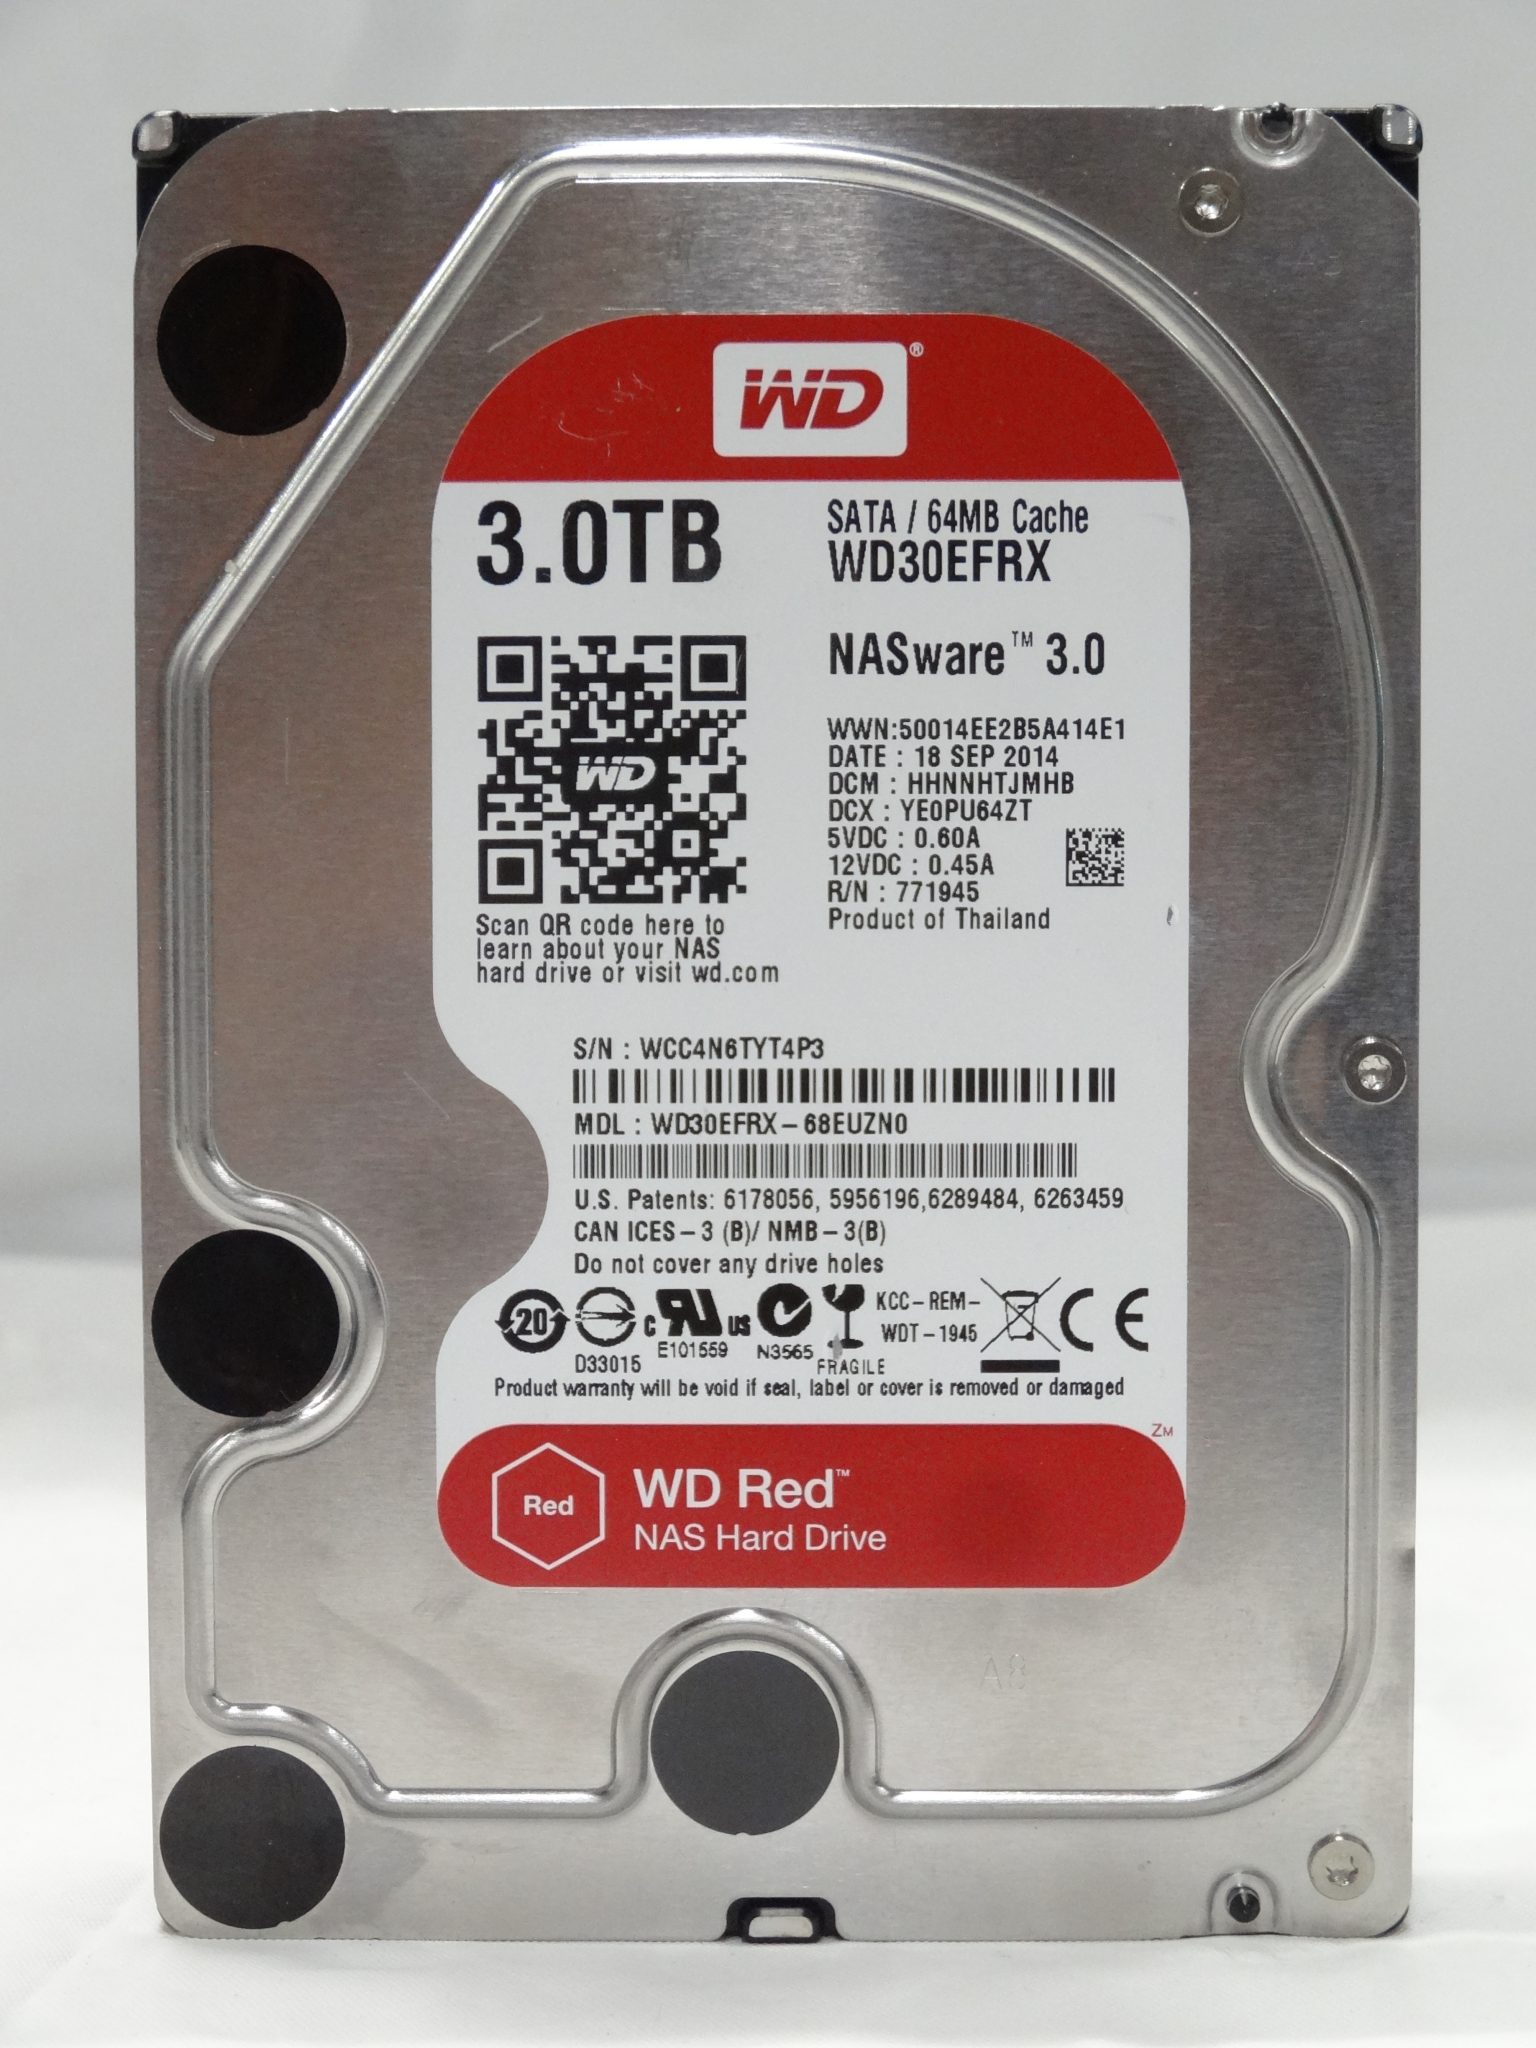 Reporter Skov scaring CLR Solutions Western Digital WD30EFRX 3TB 5,400RPM 64MB Cache SATA 3.5" WD  Red NAS Hard Drive - CLR Solutions